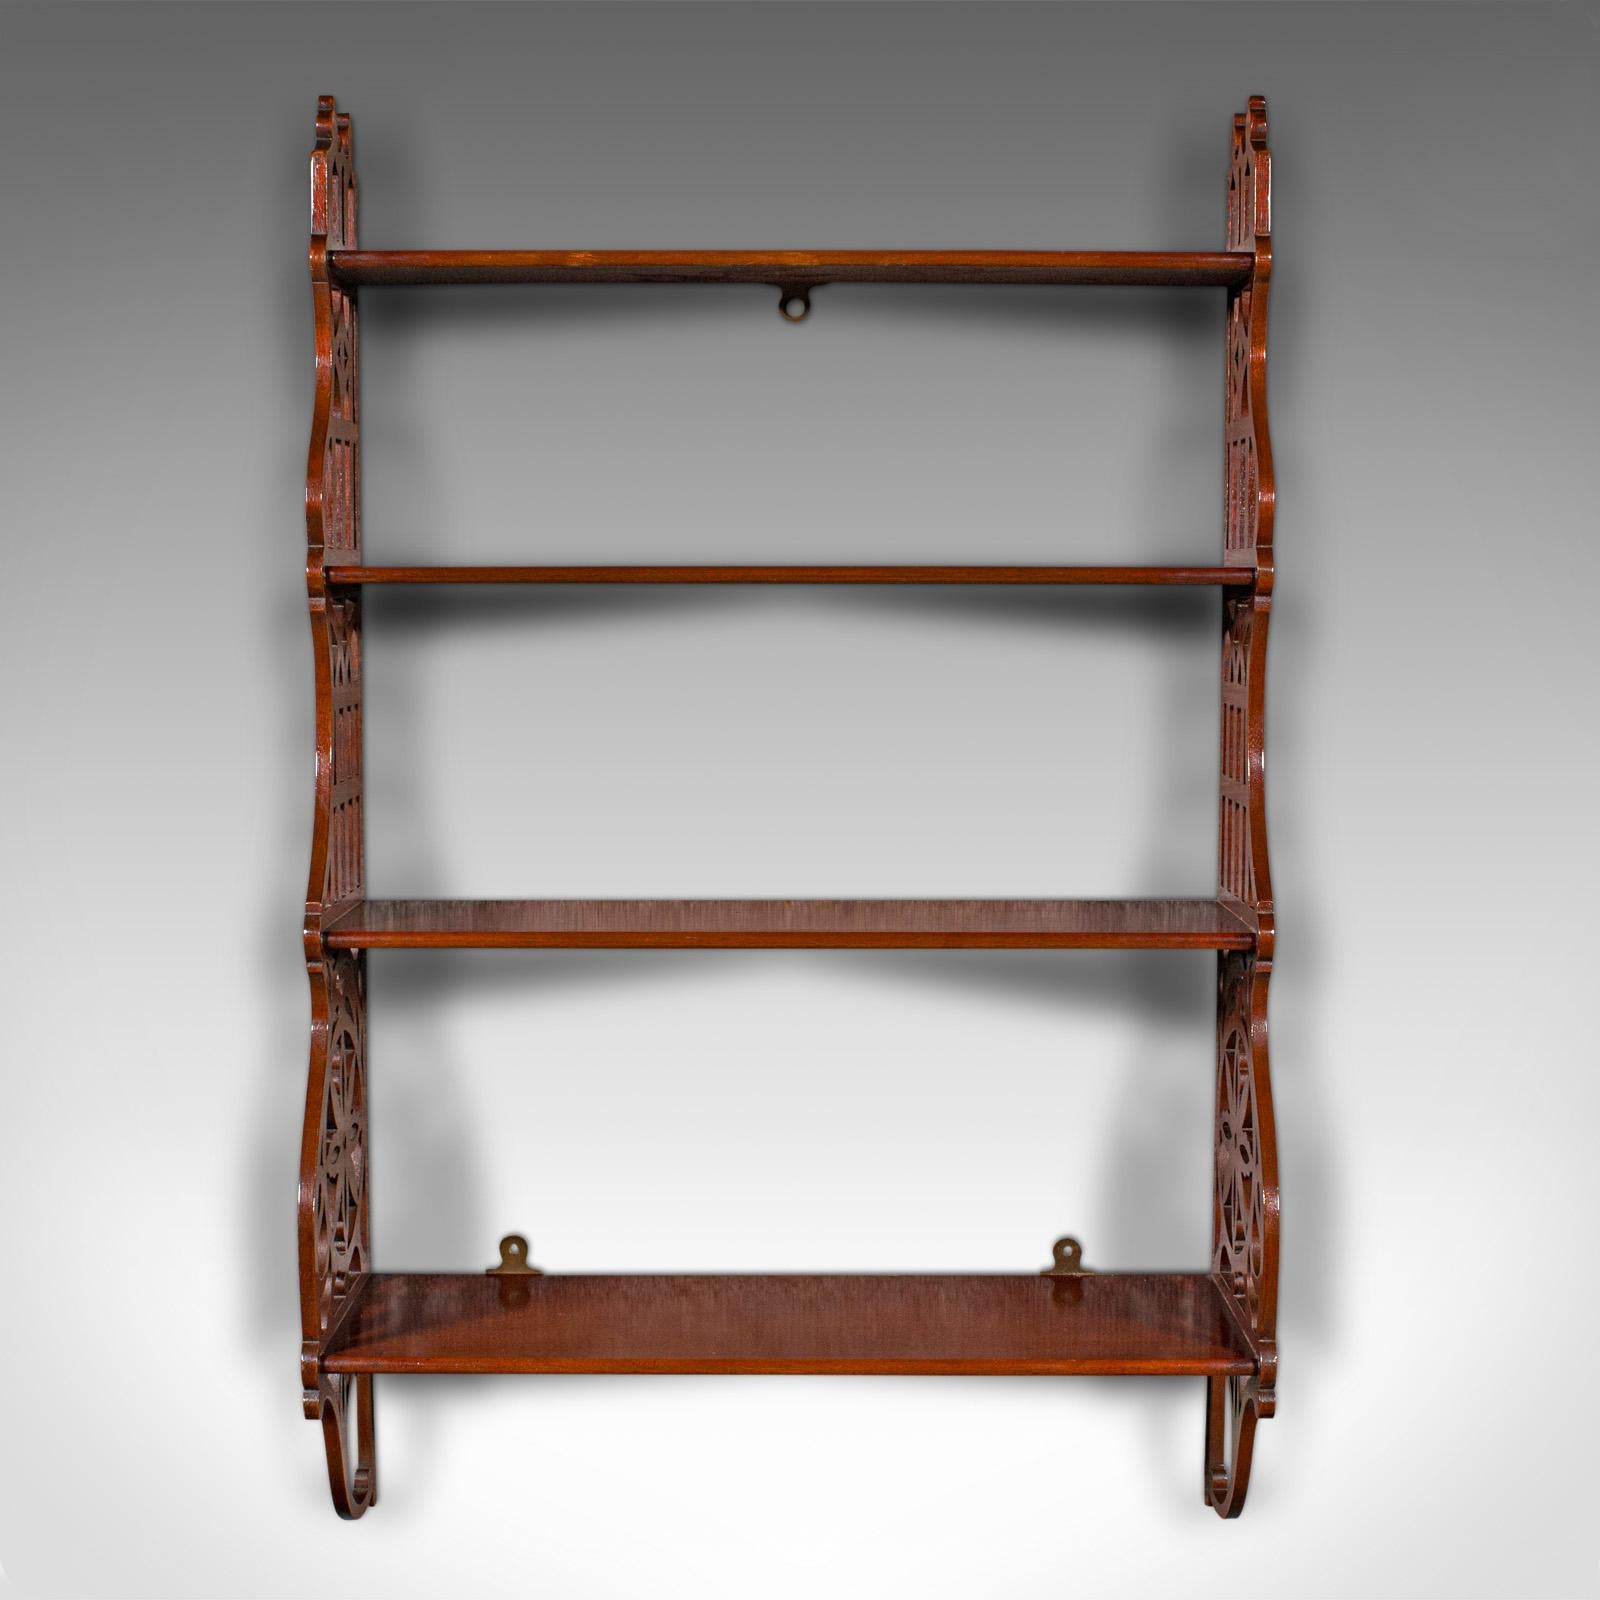 
This is an antique 4-tier mounted whatnot. An English, mahogany set of wall shelves, dating to the Edwardian period, circa 1910.

Elegantly finished with an appealing graduated form
Displaying a desirable aged patina and in good order
Select stocks